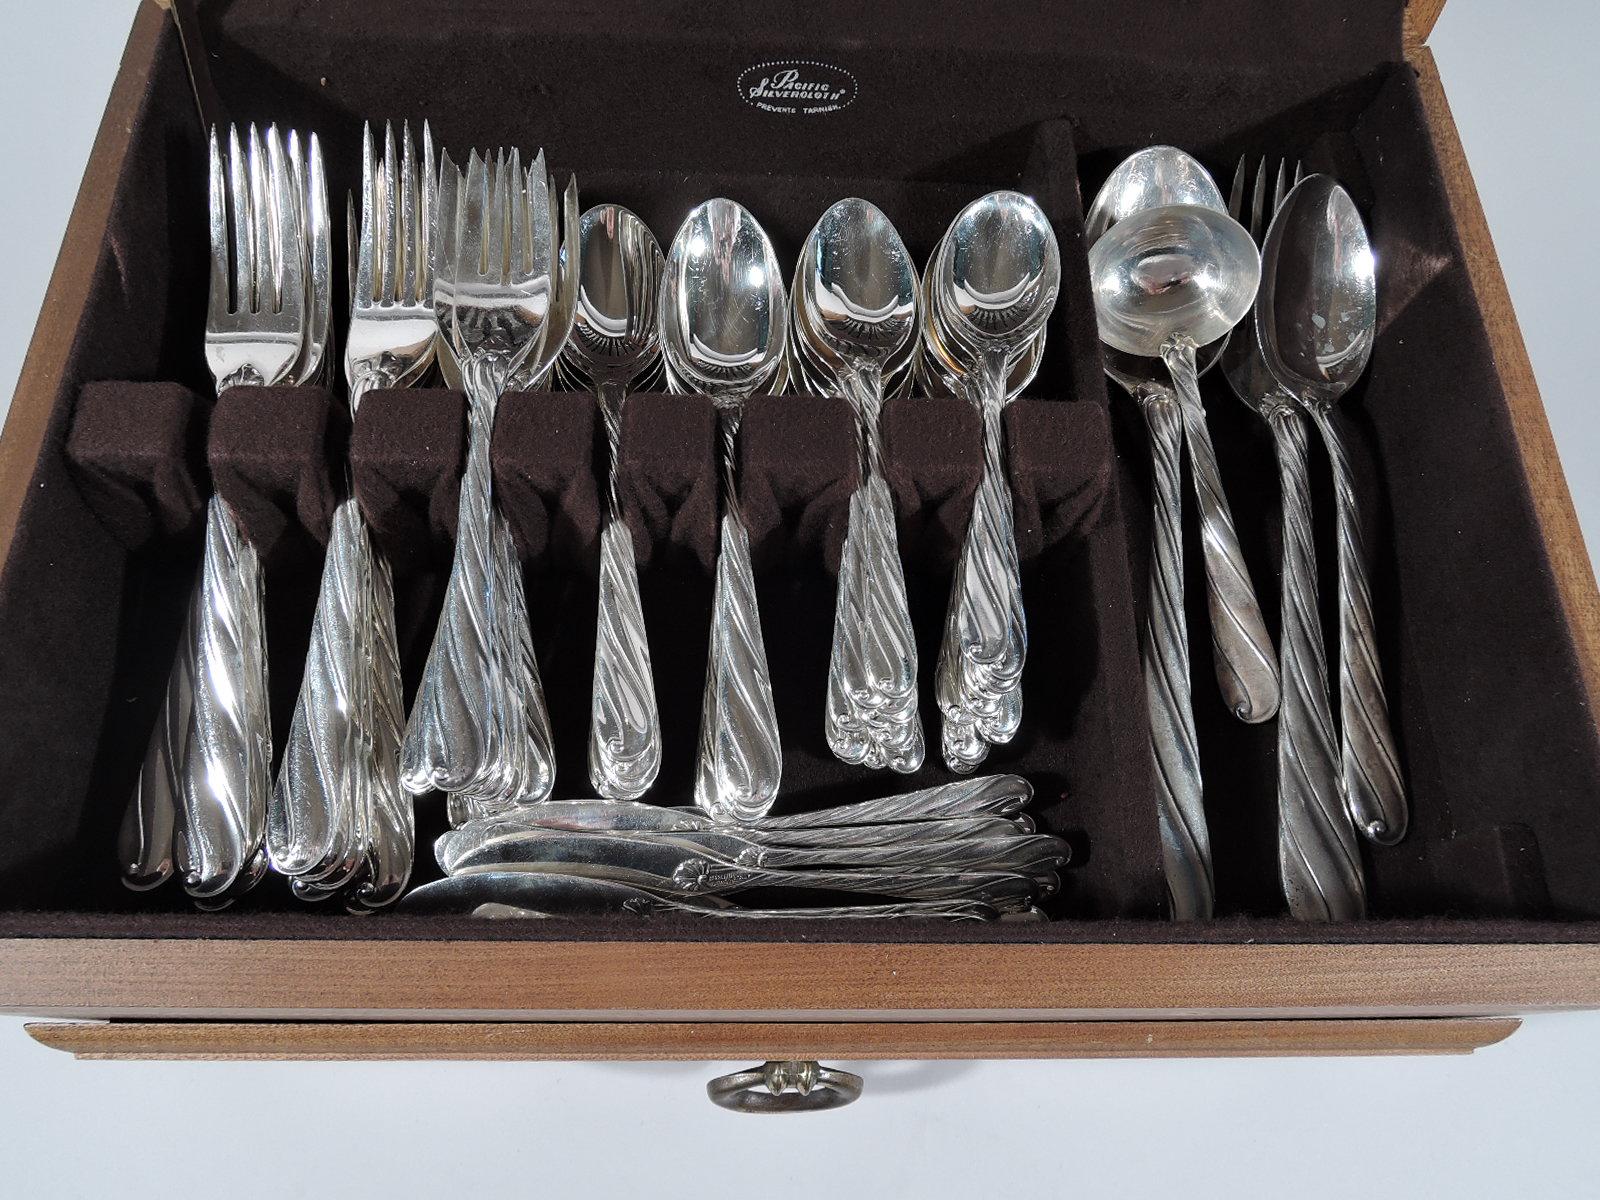 20th Century Buccellati Torchon Sterling Silver Dinner Set for 12 with 88 Pieces